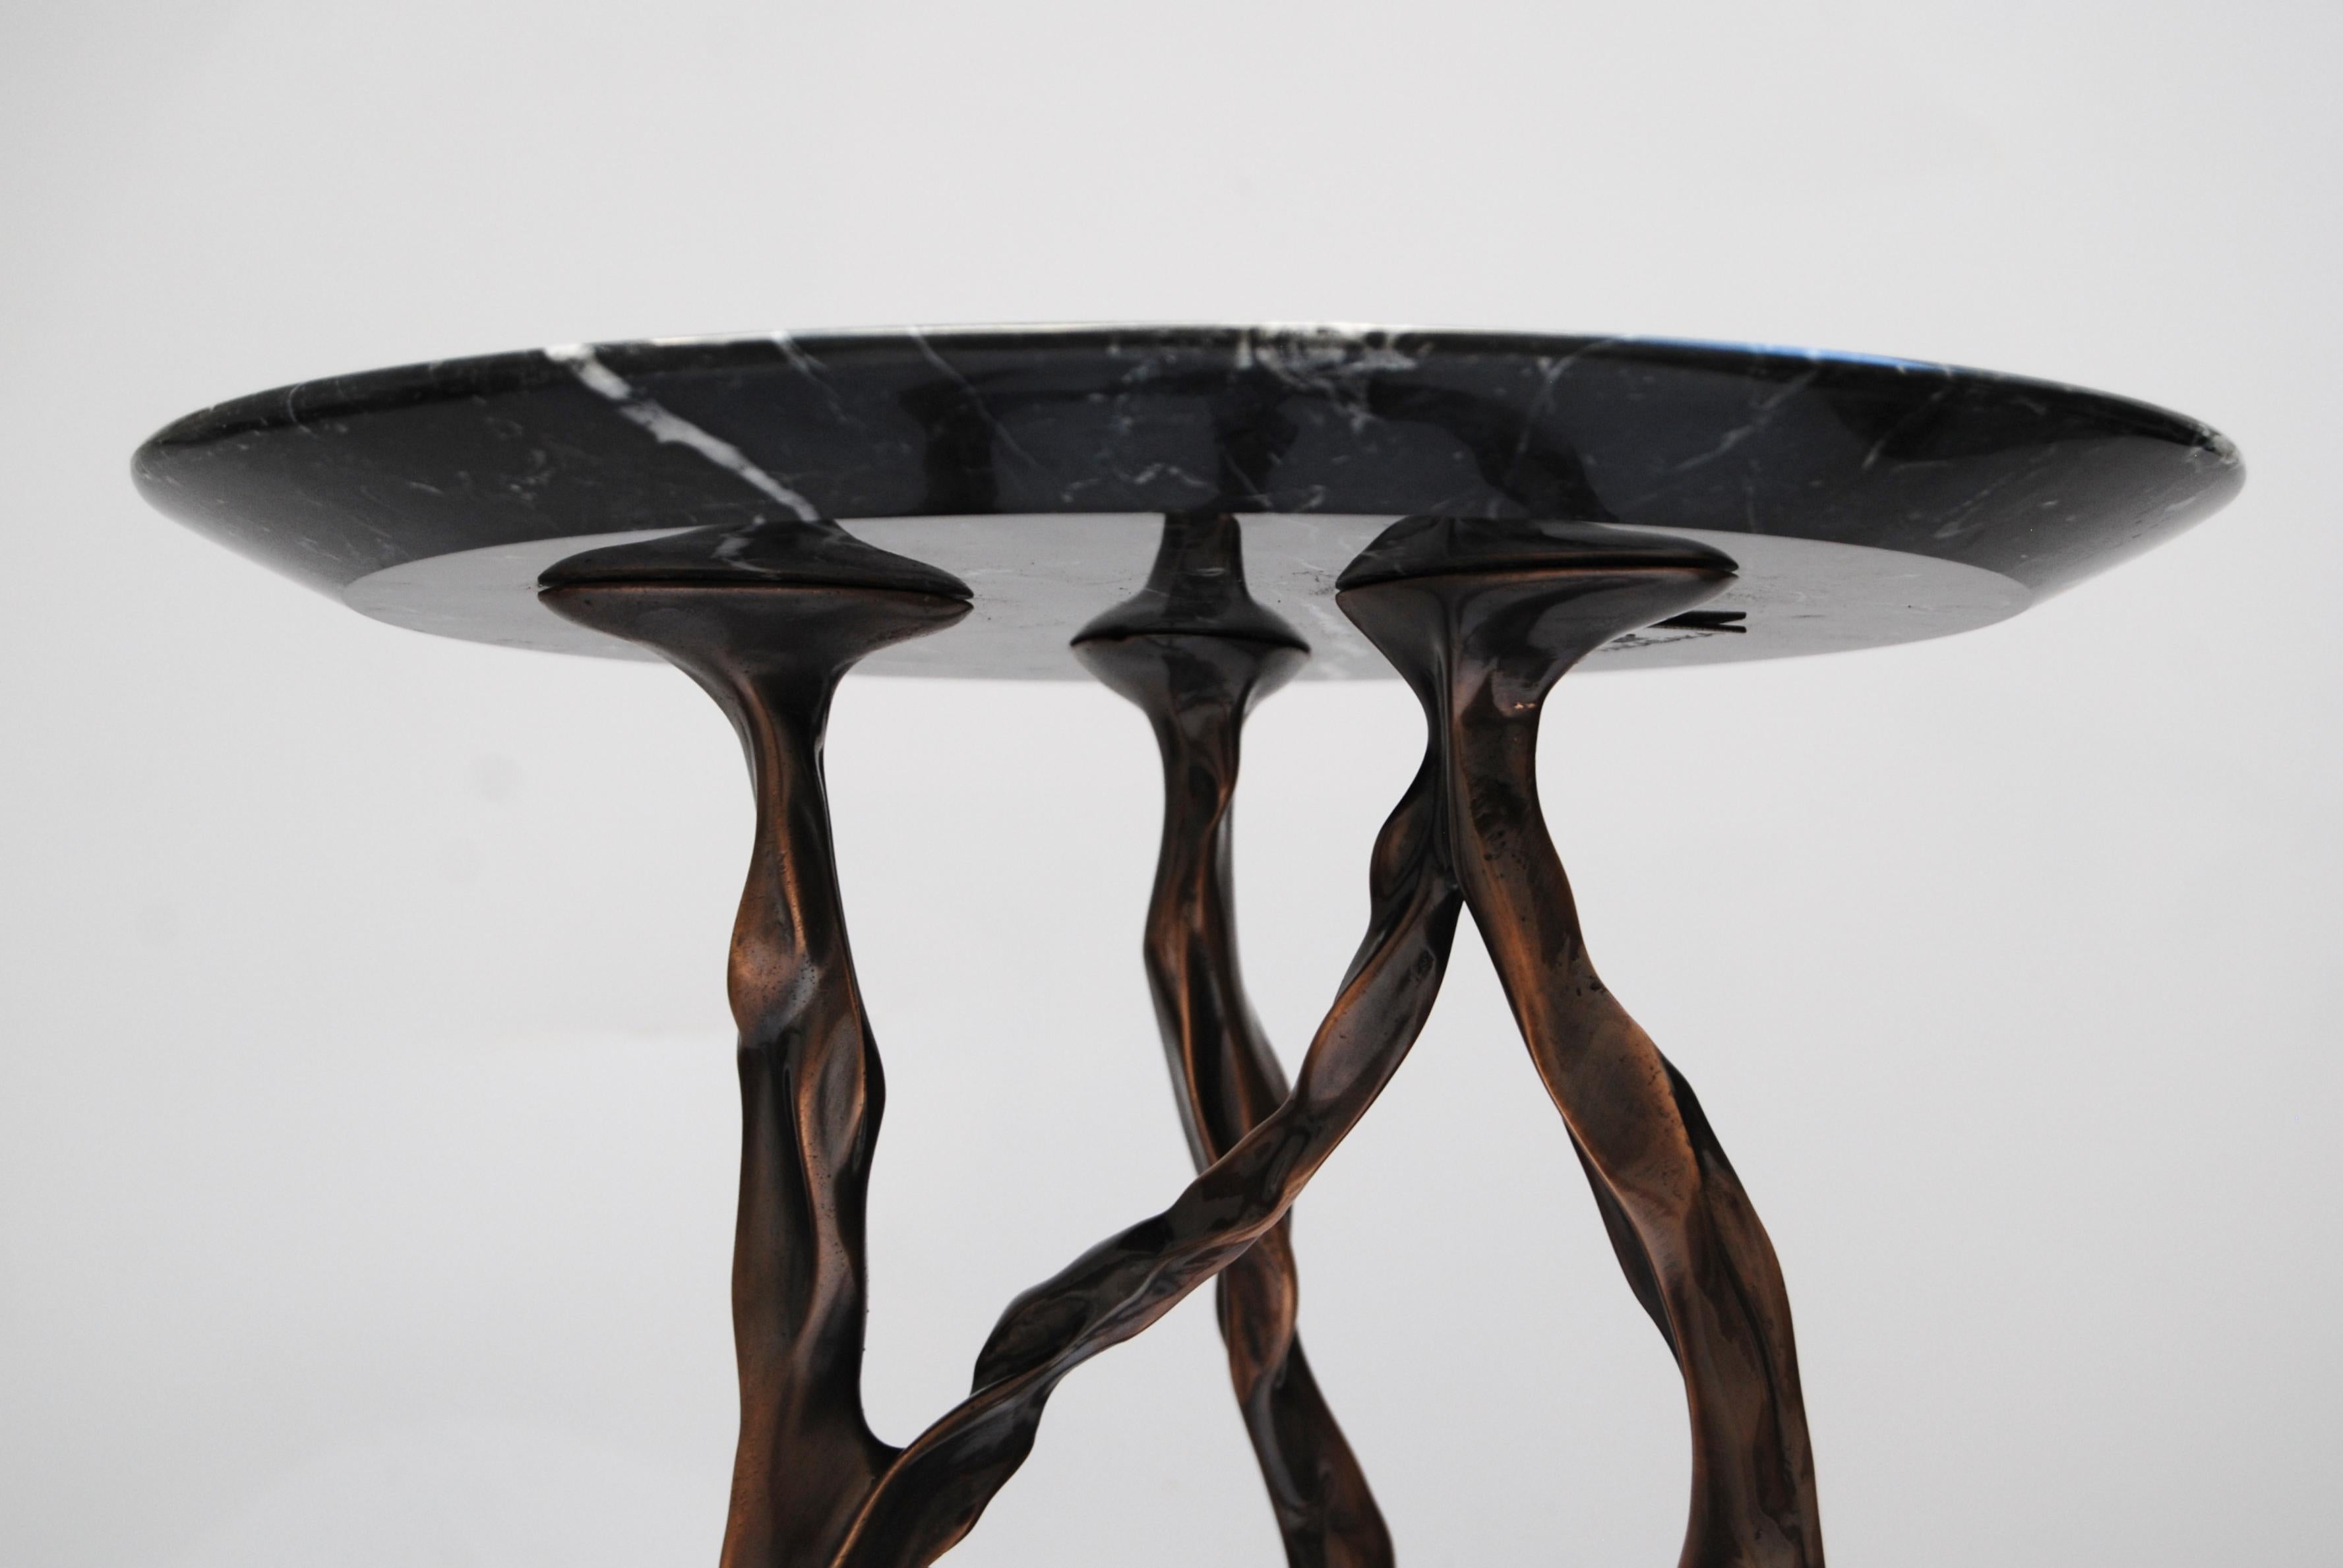 Brazilian Pair of Dark Bronze Side Tables with Marquina Marble Top by Fakasaka Design